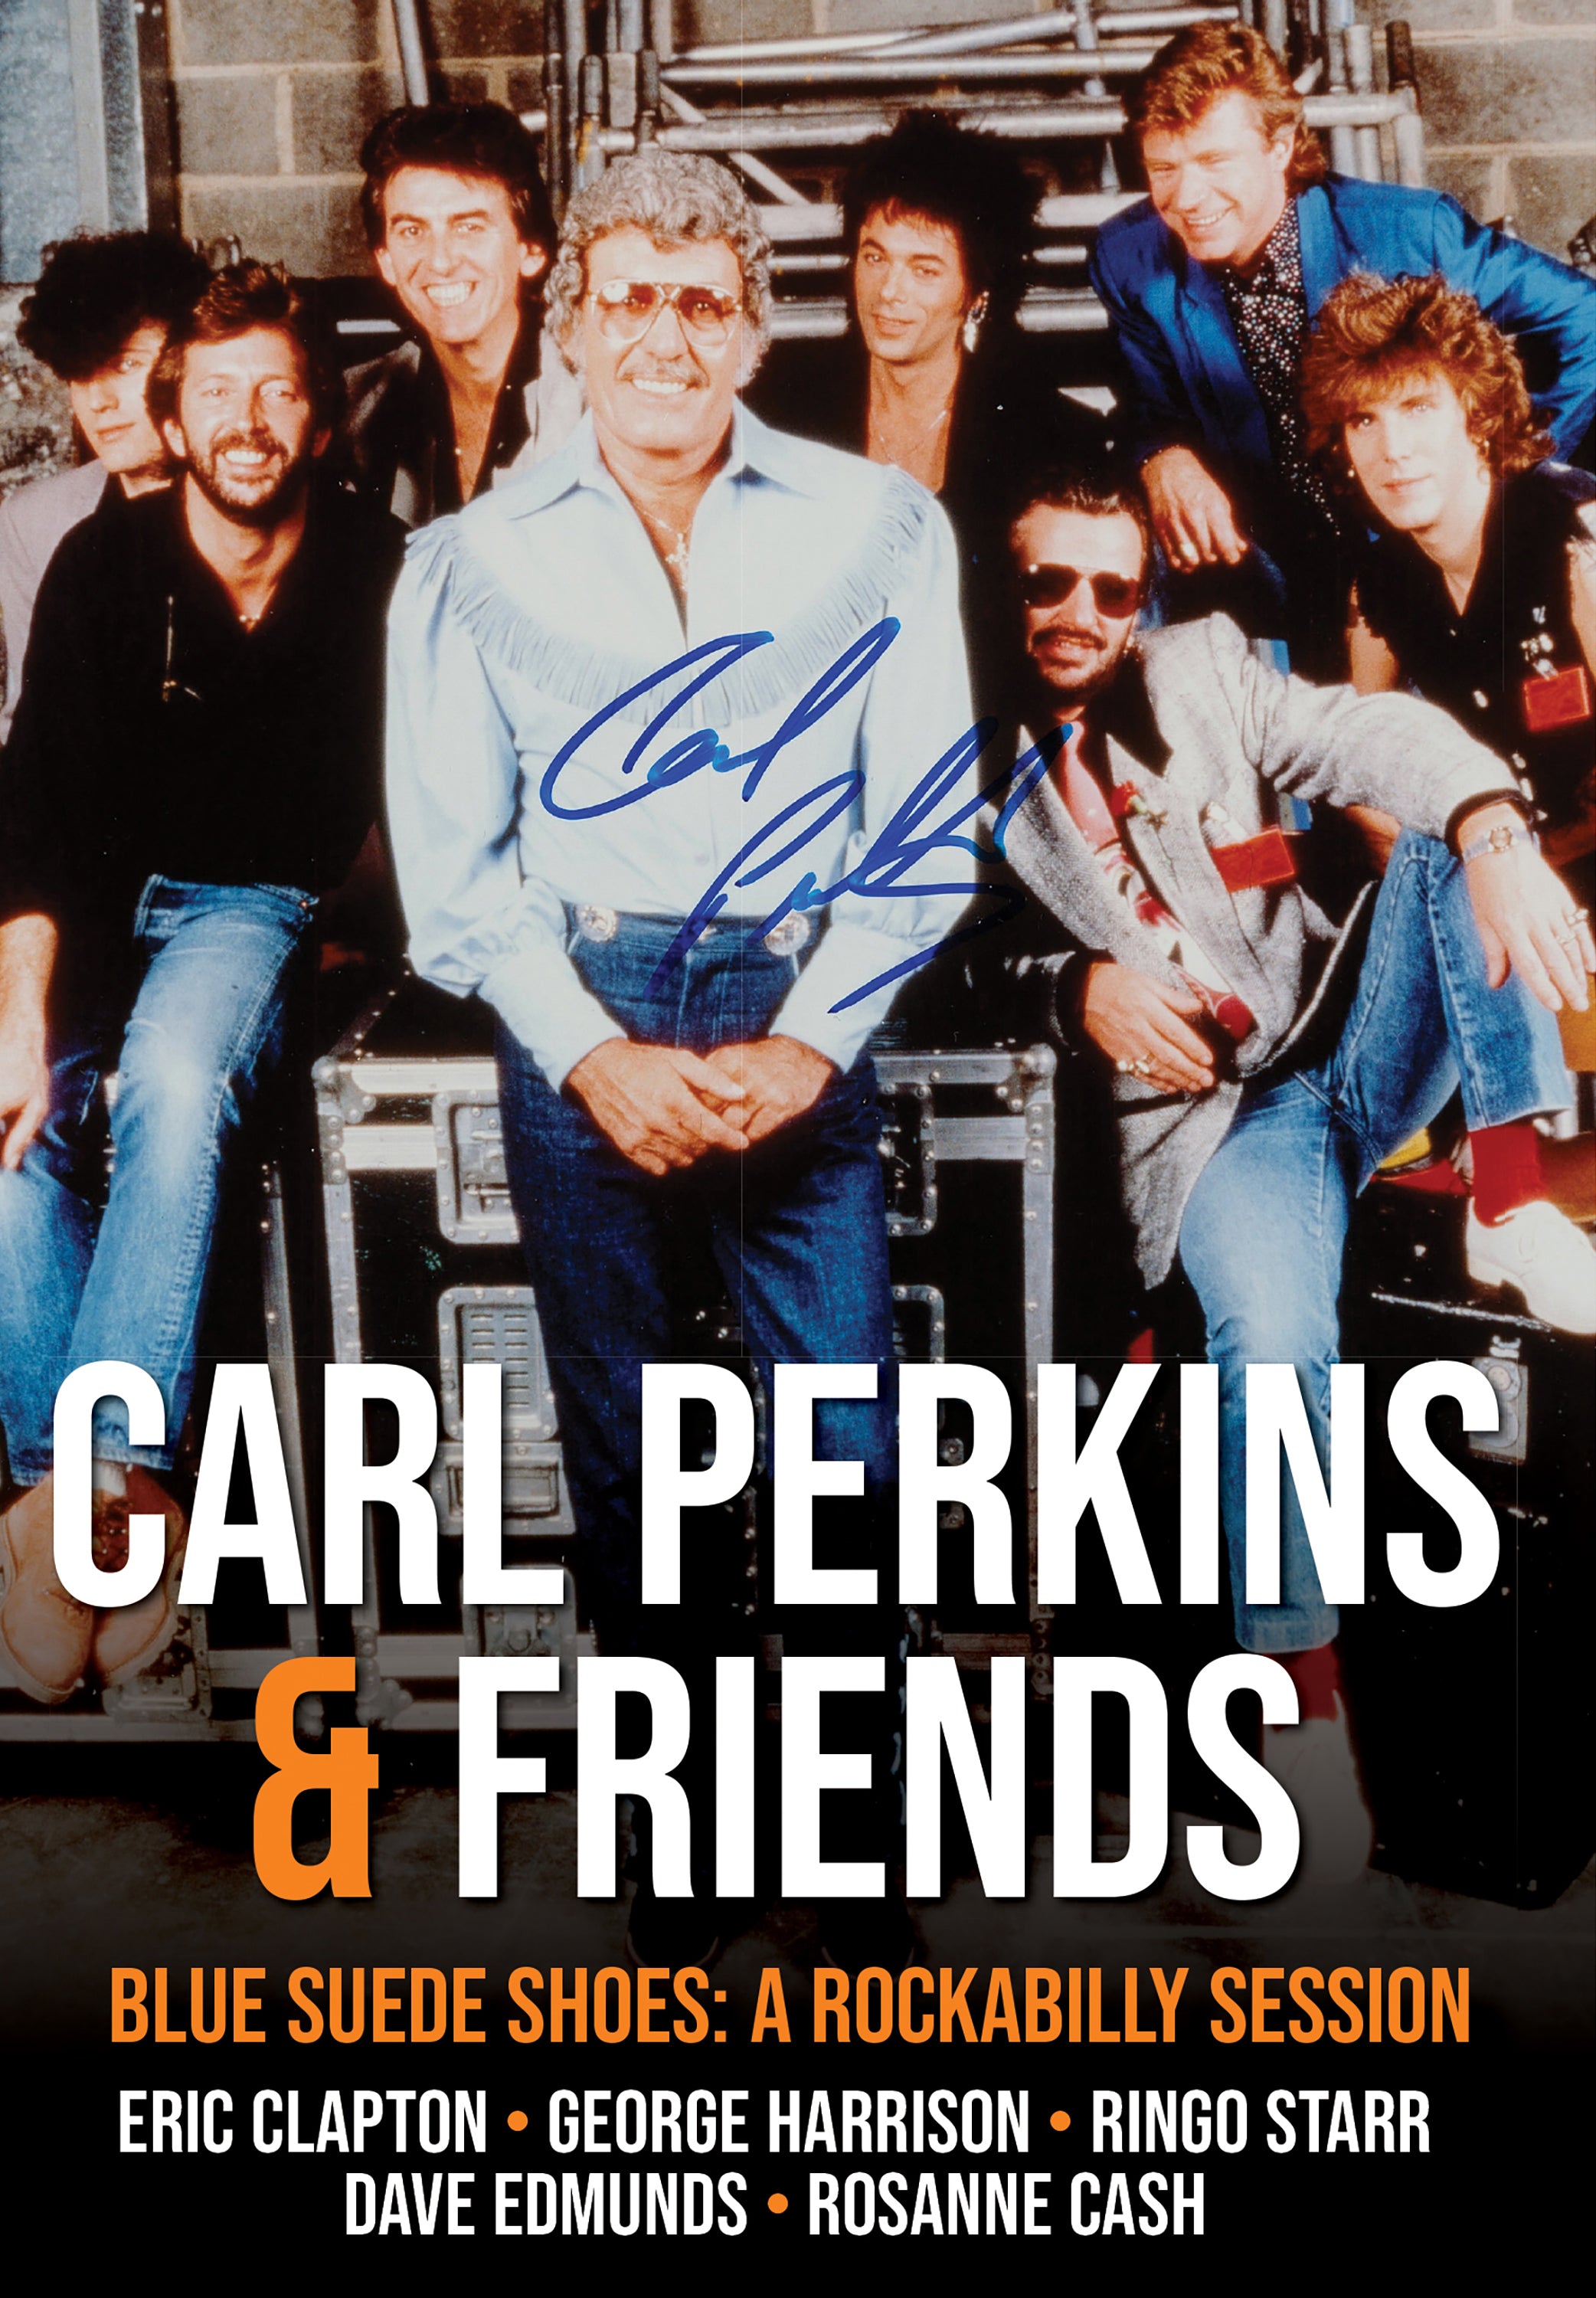 CARL PERKINS & FRIENDS - BLUE SUEDE SHOES, A ROCKABILLY SESSION (DVD)